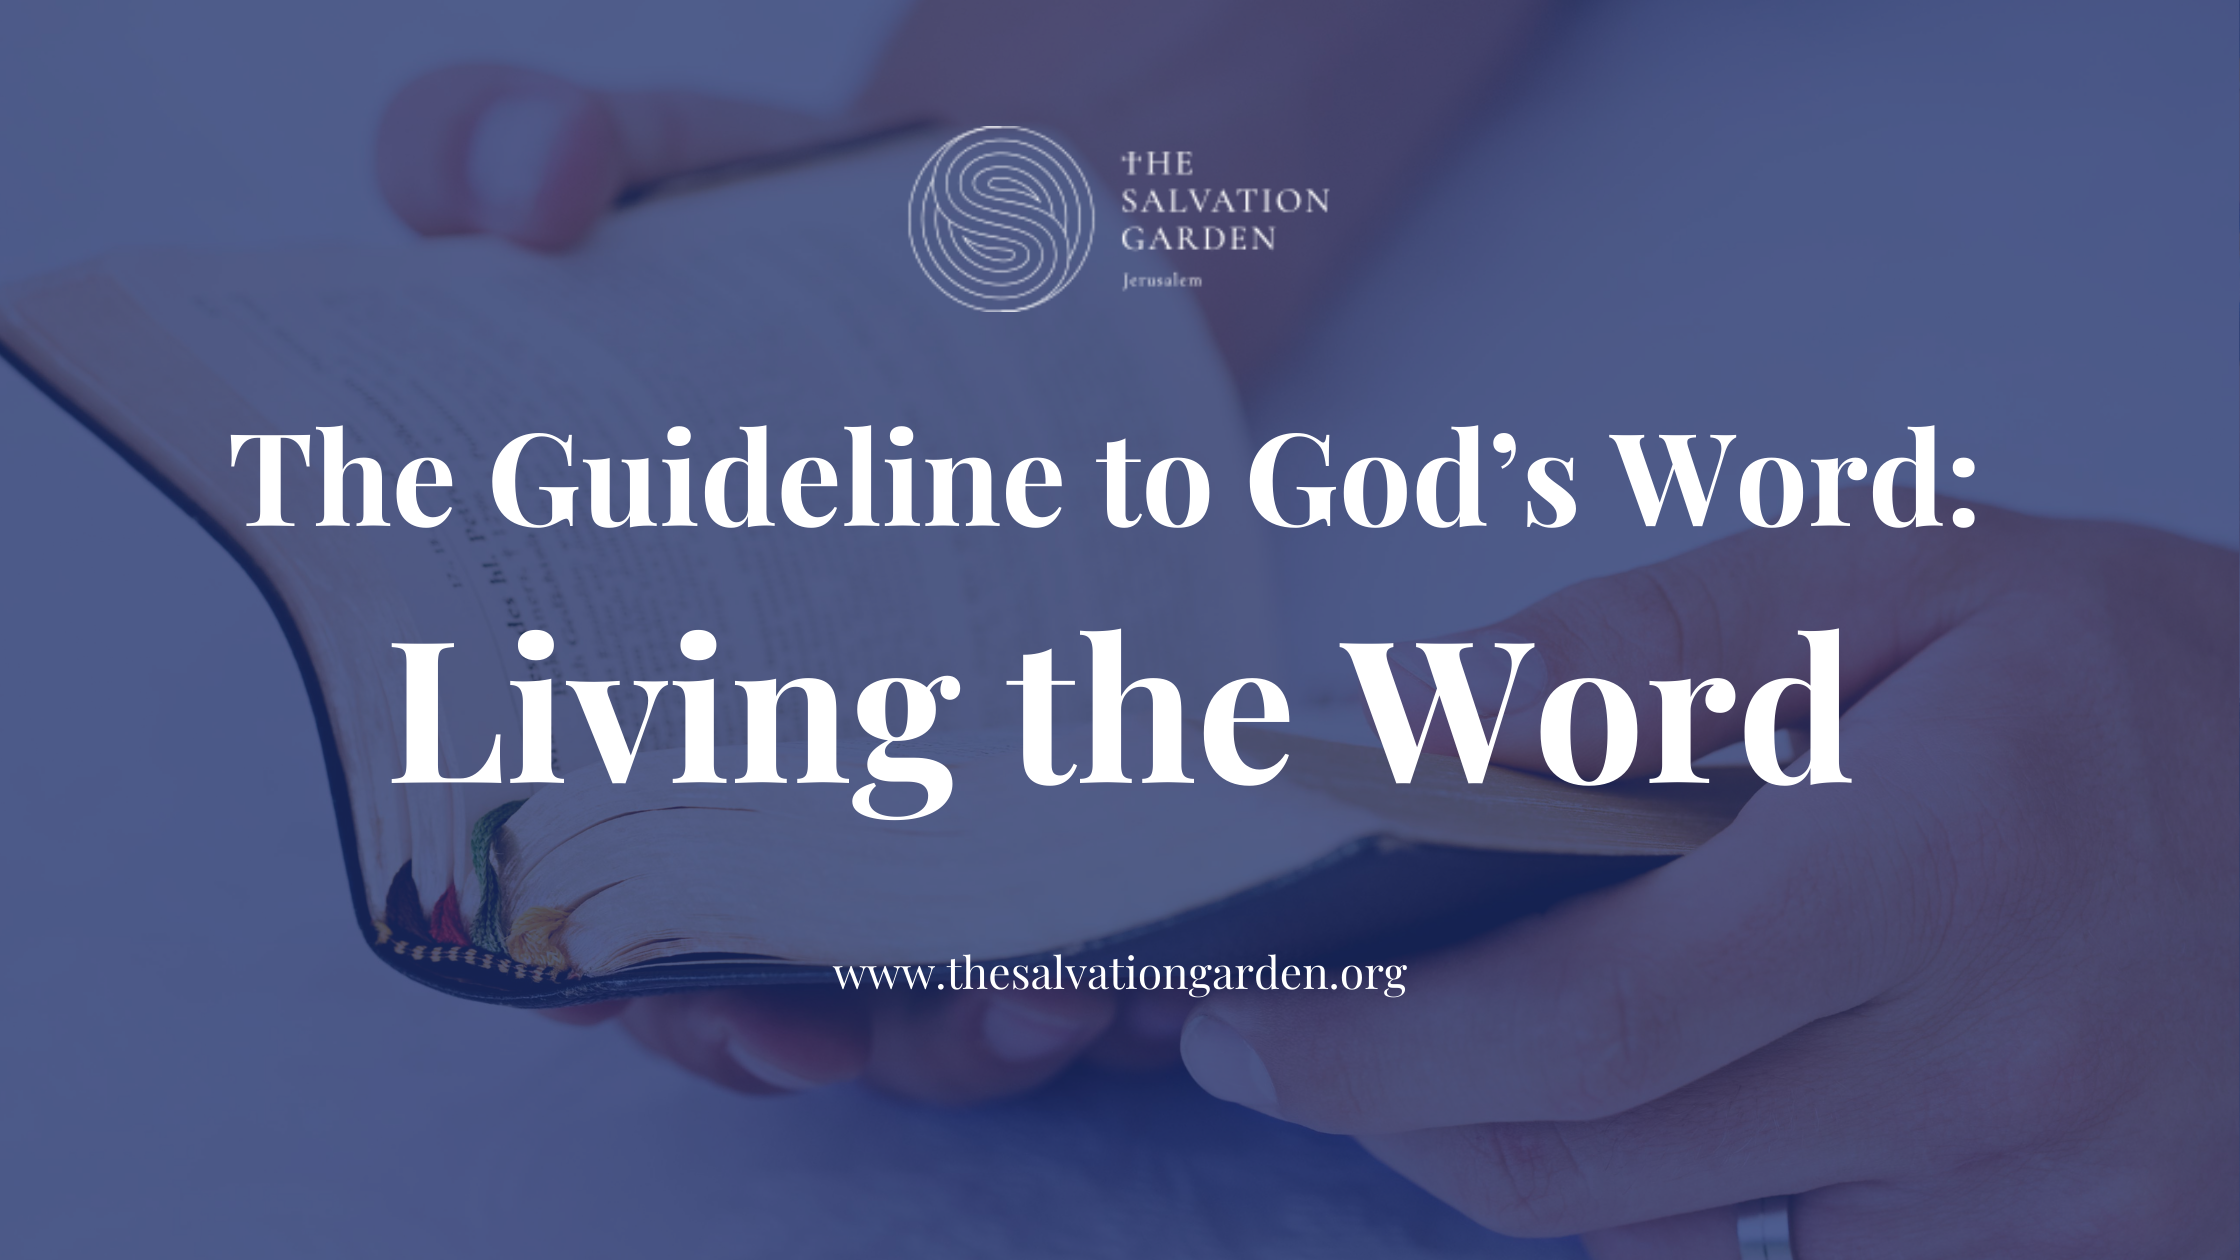 The Guideline to God’s Word: Living the Word